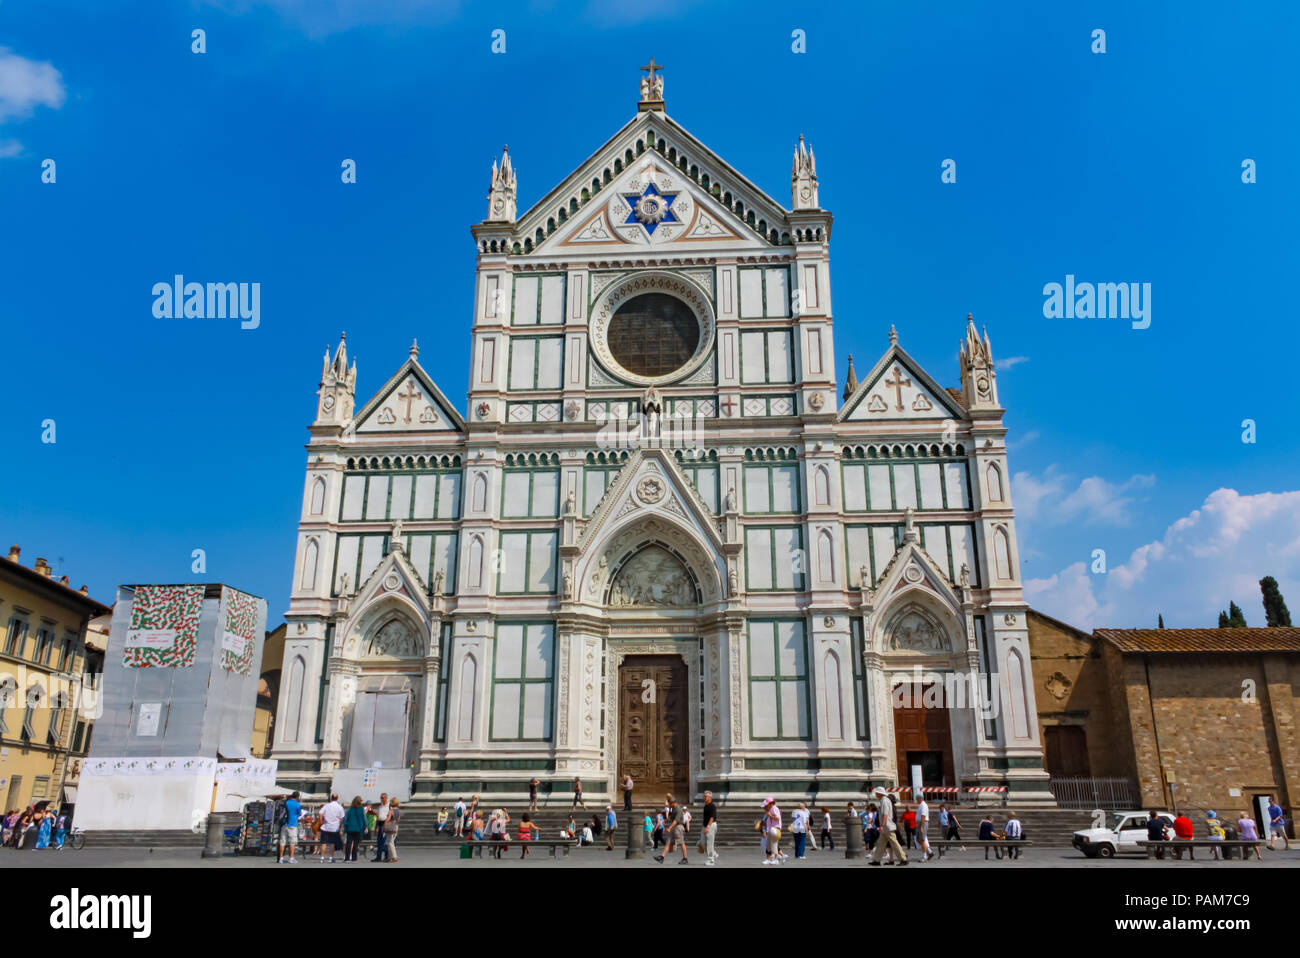 FLORENCE, ITALY - May 23, 2011: external view of Basilica Santa Croce in Florence, unidentified people admiring the facade from Piazza Santa Croce in  Stock Photo